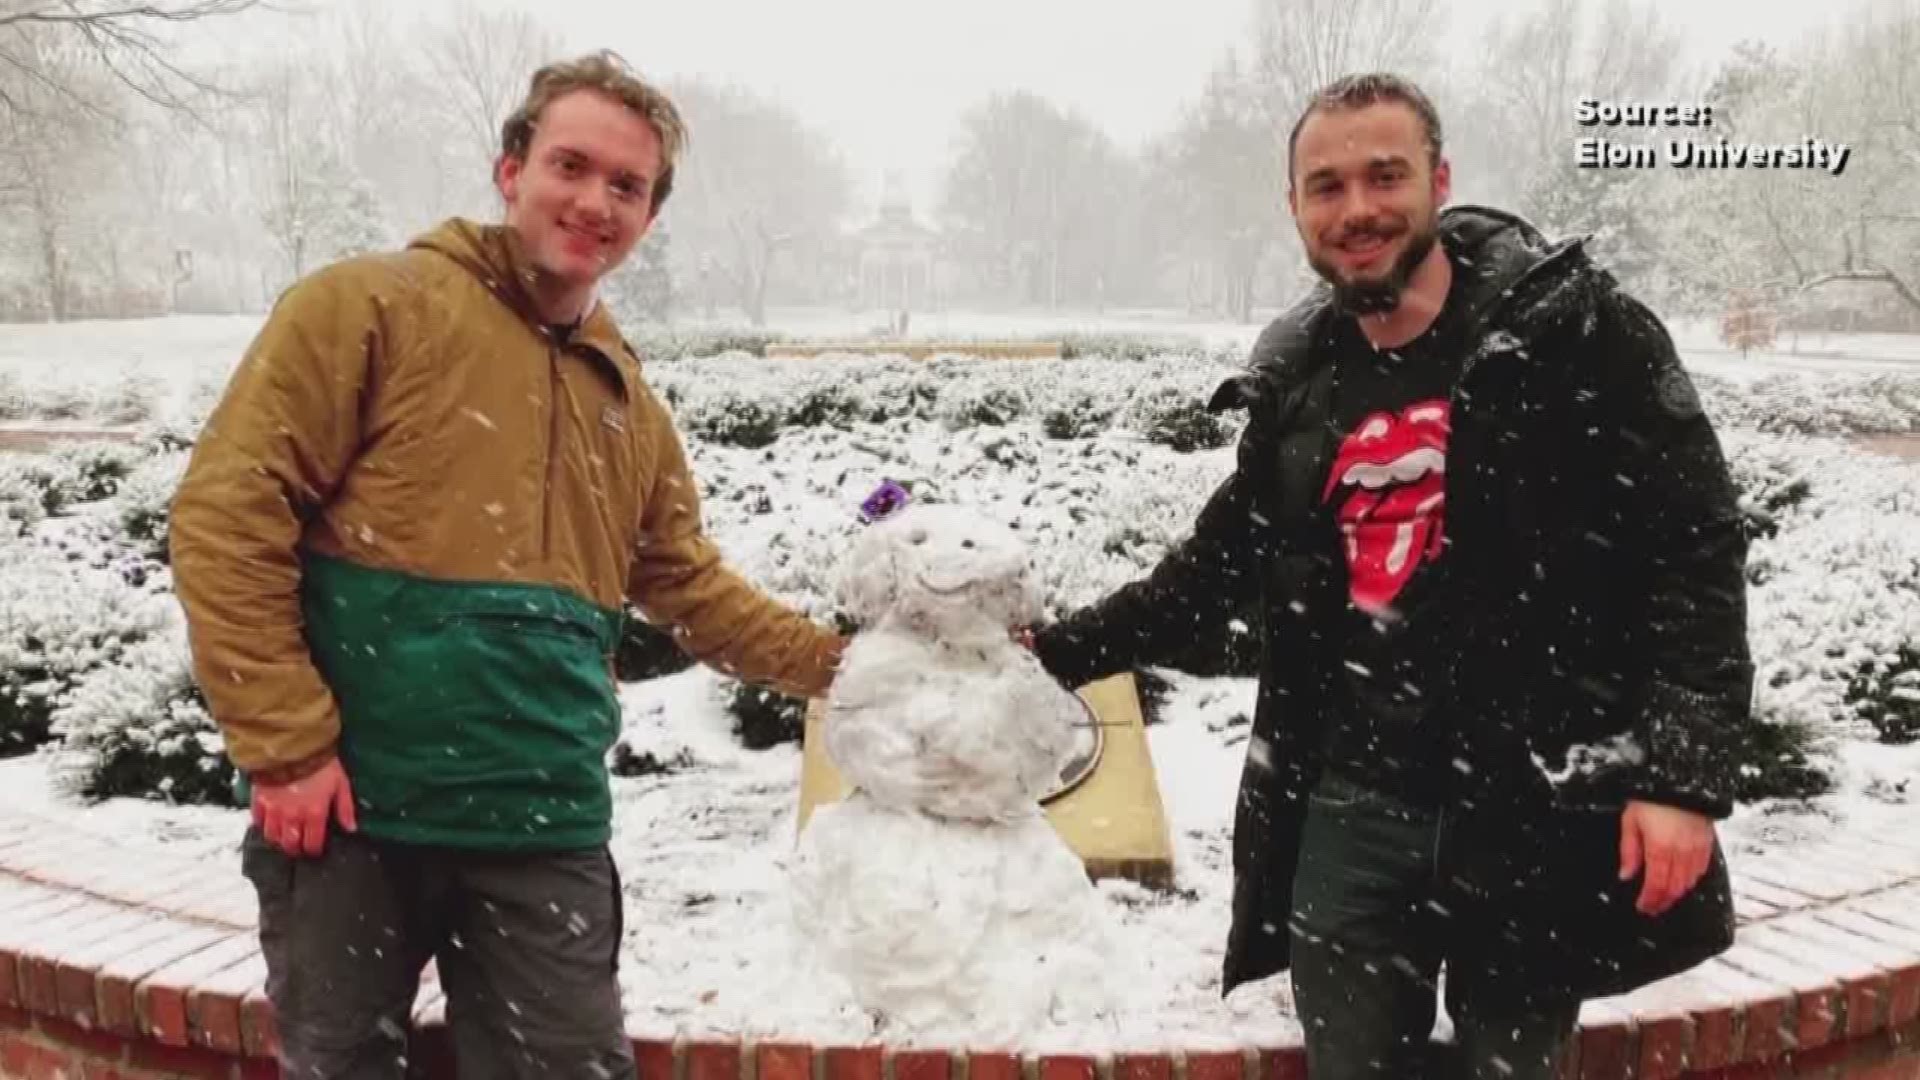 Some students rejoiced over canceled classes. Others used the snow-blanketed campus for an impromptu photo shoot.